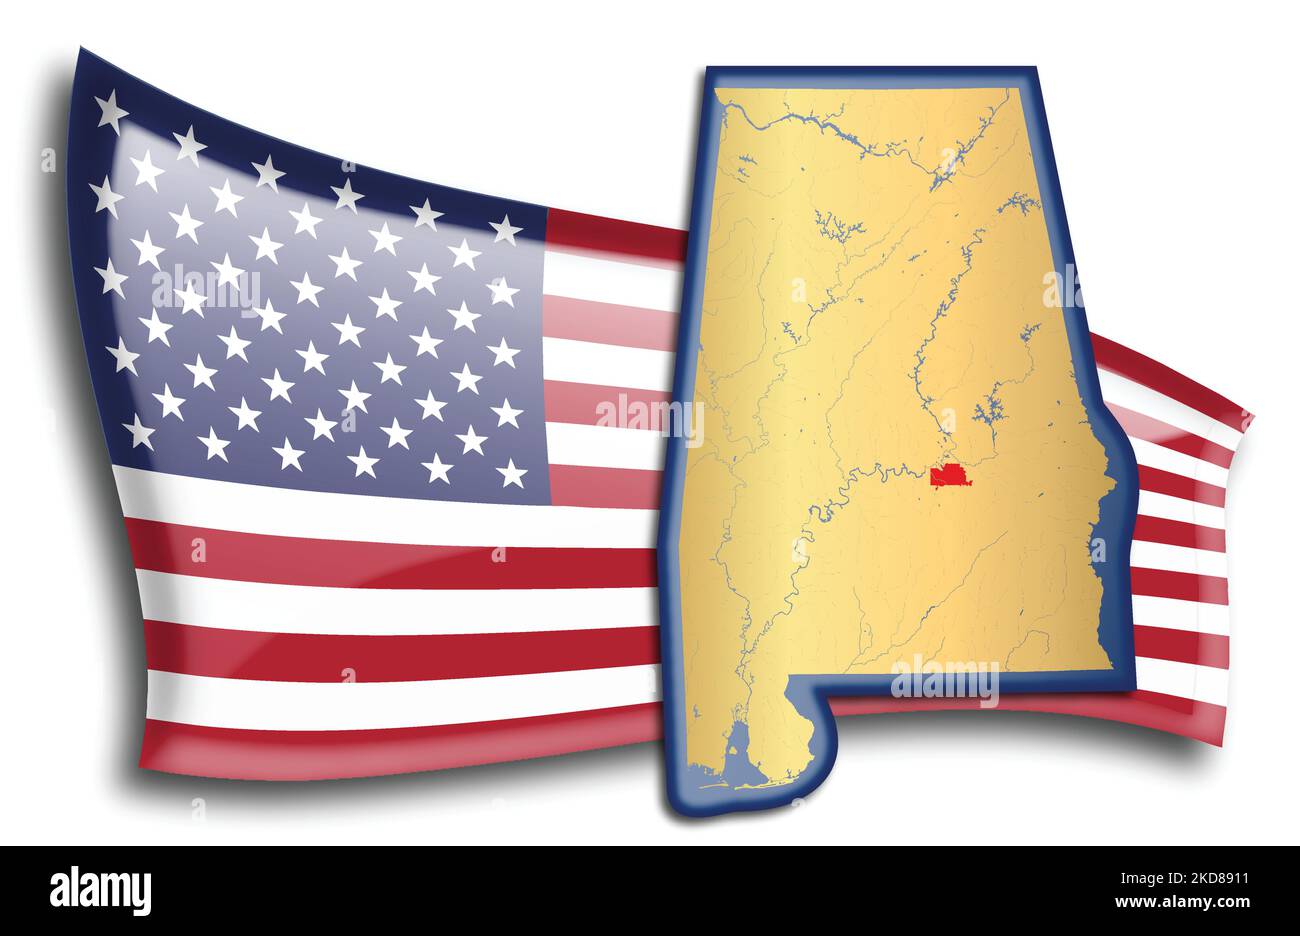 U.S. states - map of Alabama against an American flag. Rivers and lakes are shown on the map. American Flag and State Map can be used separately and e Stock Vector